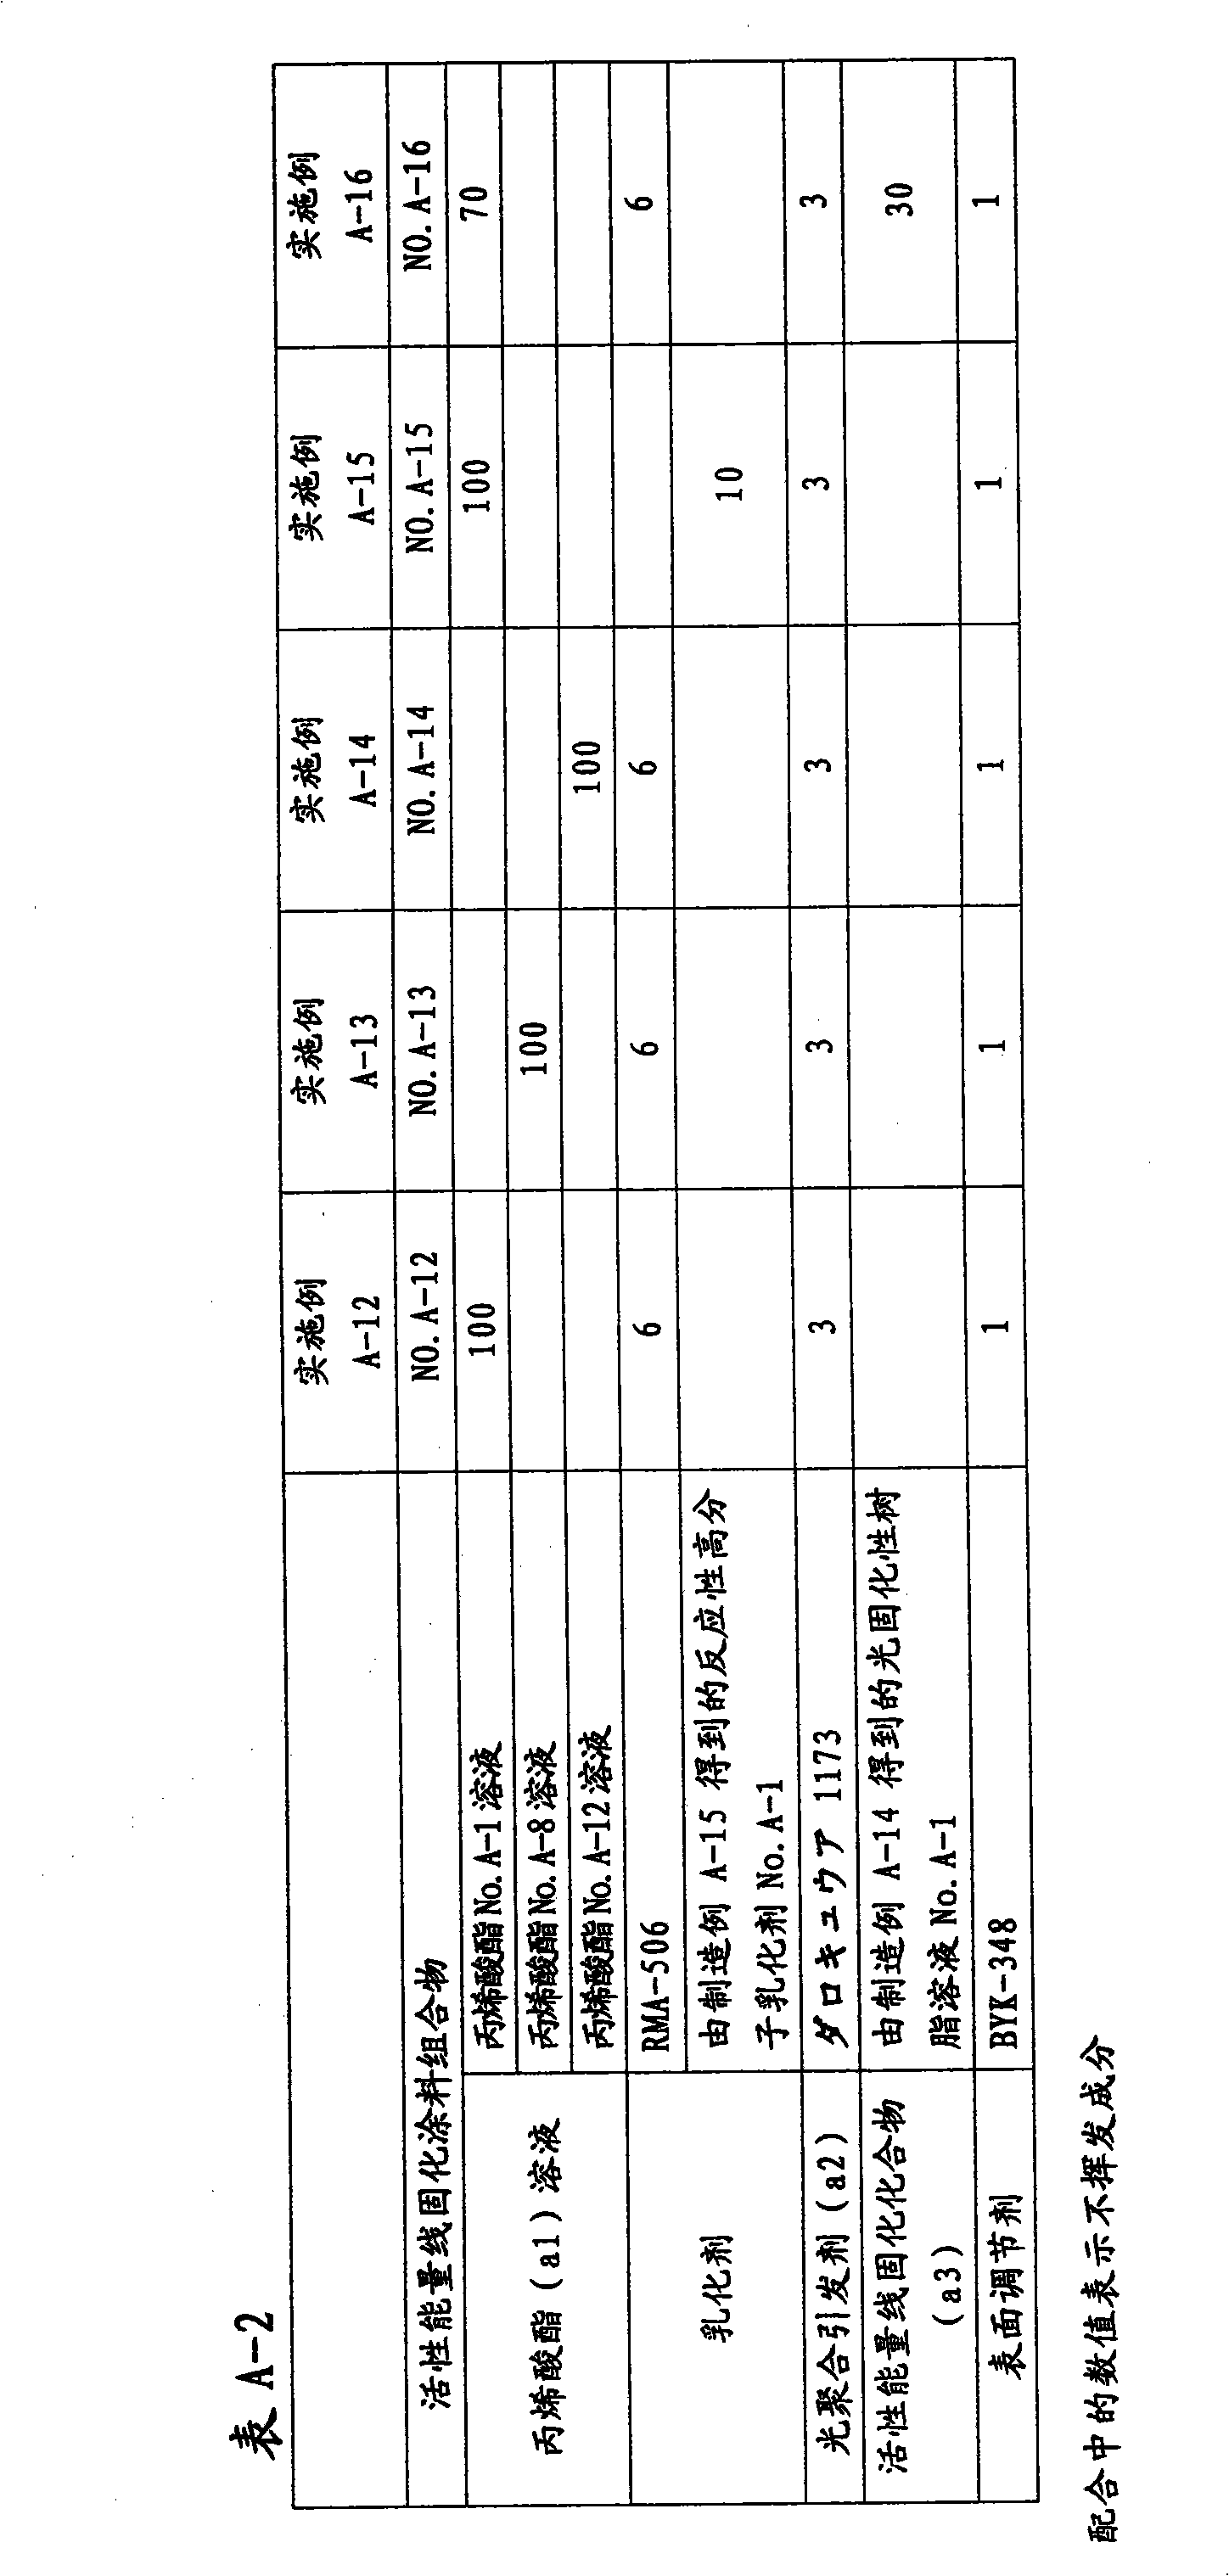 Active energy ray-curable coating composition, method for formation of coating film, and coated article